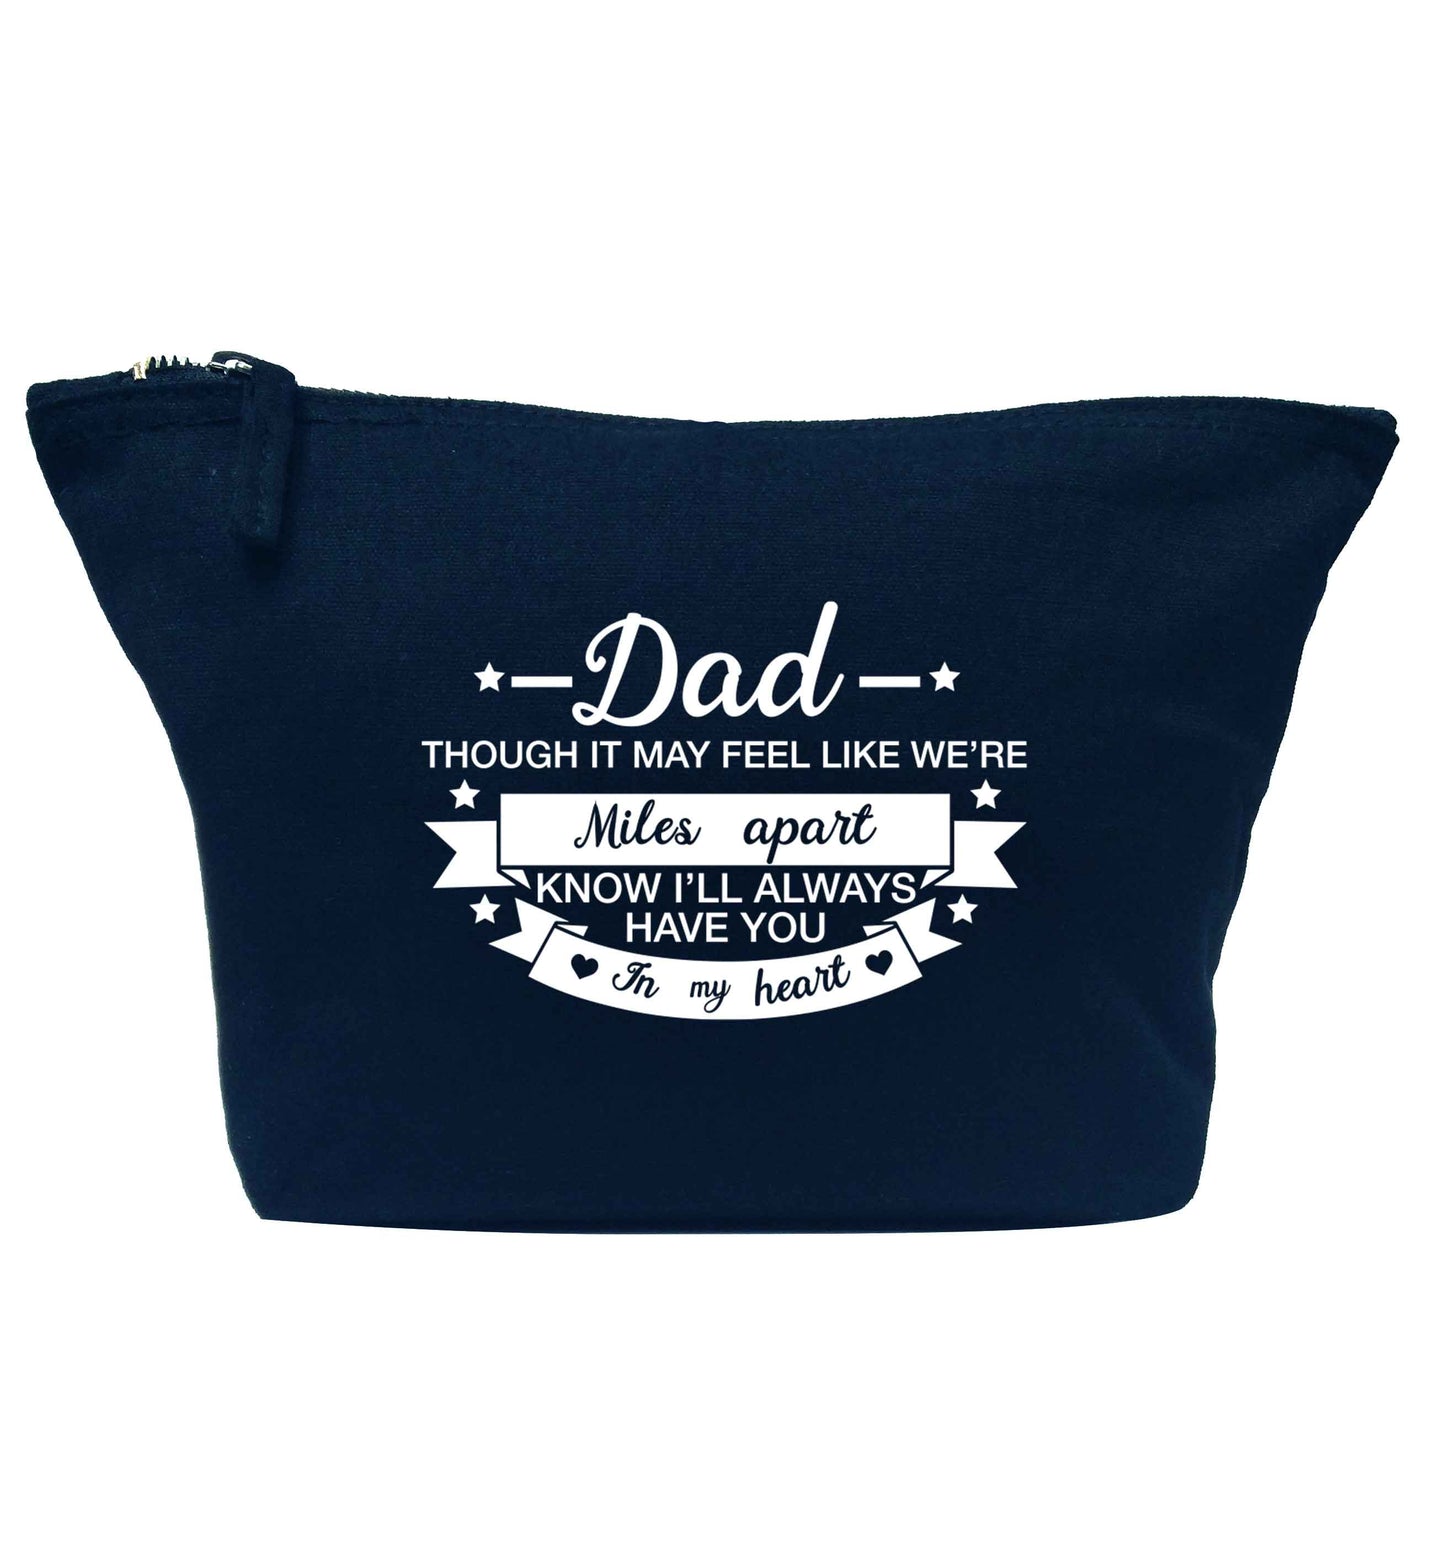 Dad though it may feel like we're miles apart know I'll always have you in my heart navy makeup bag